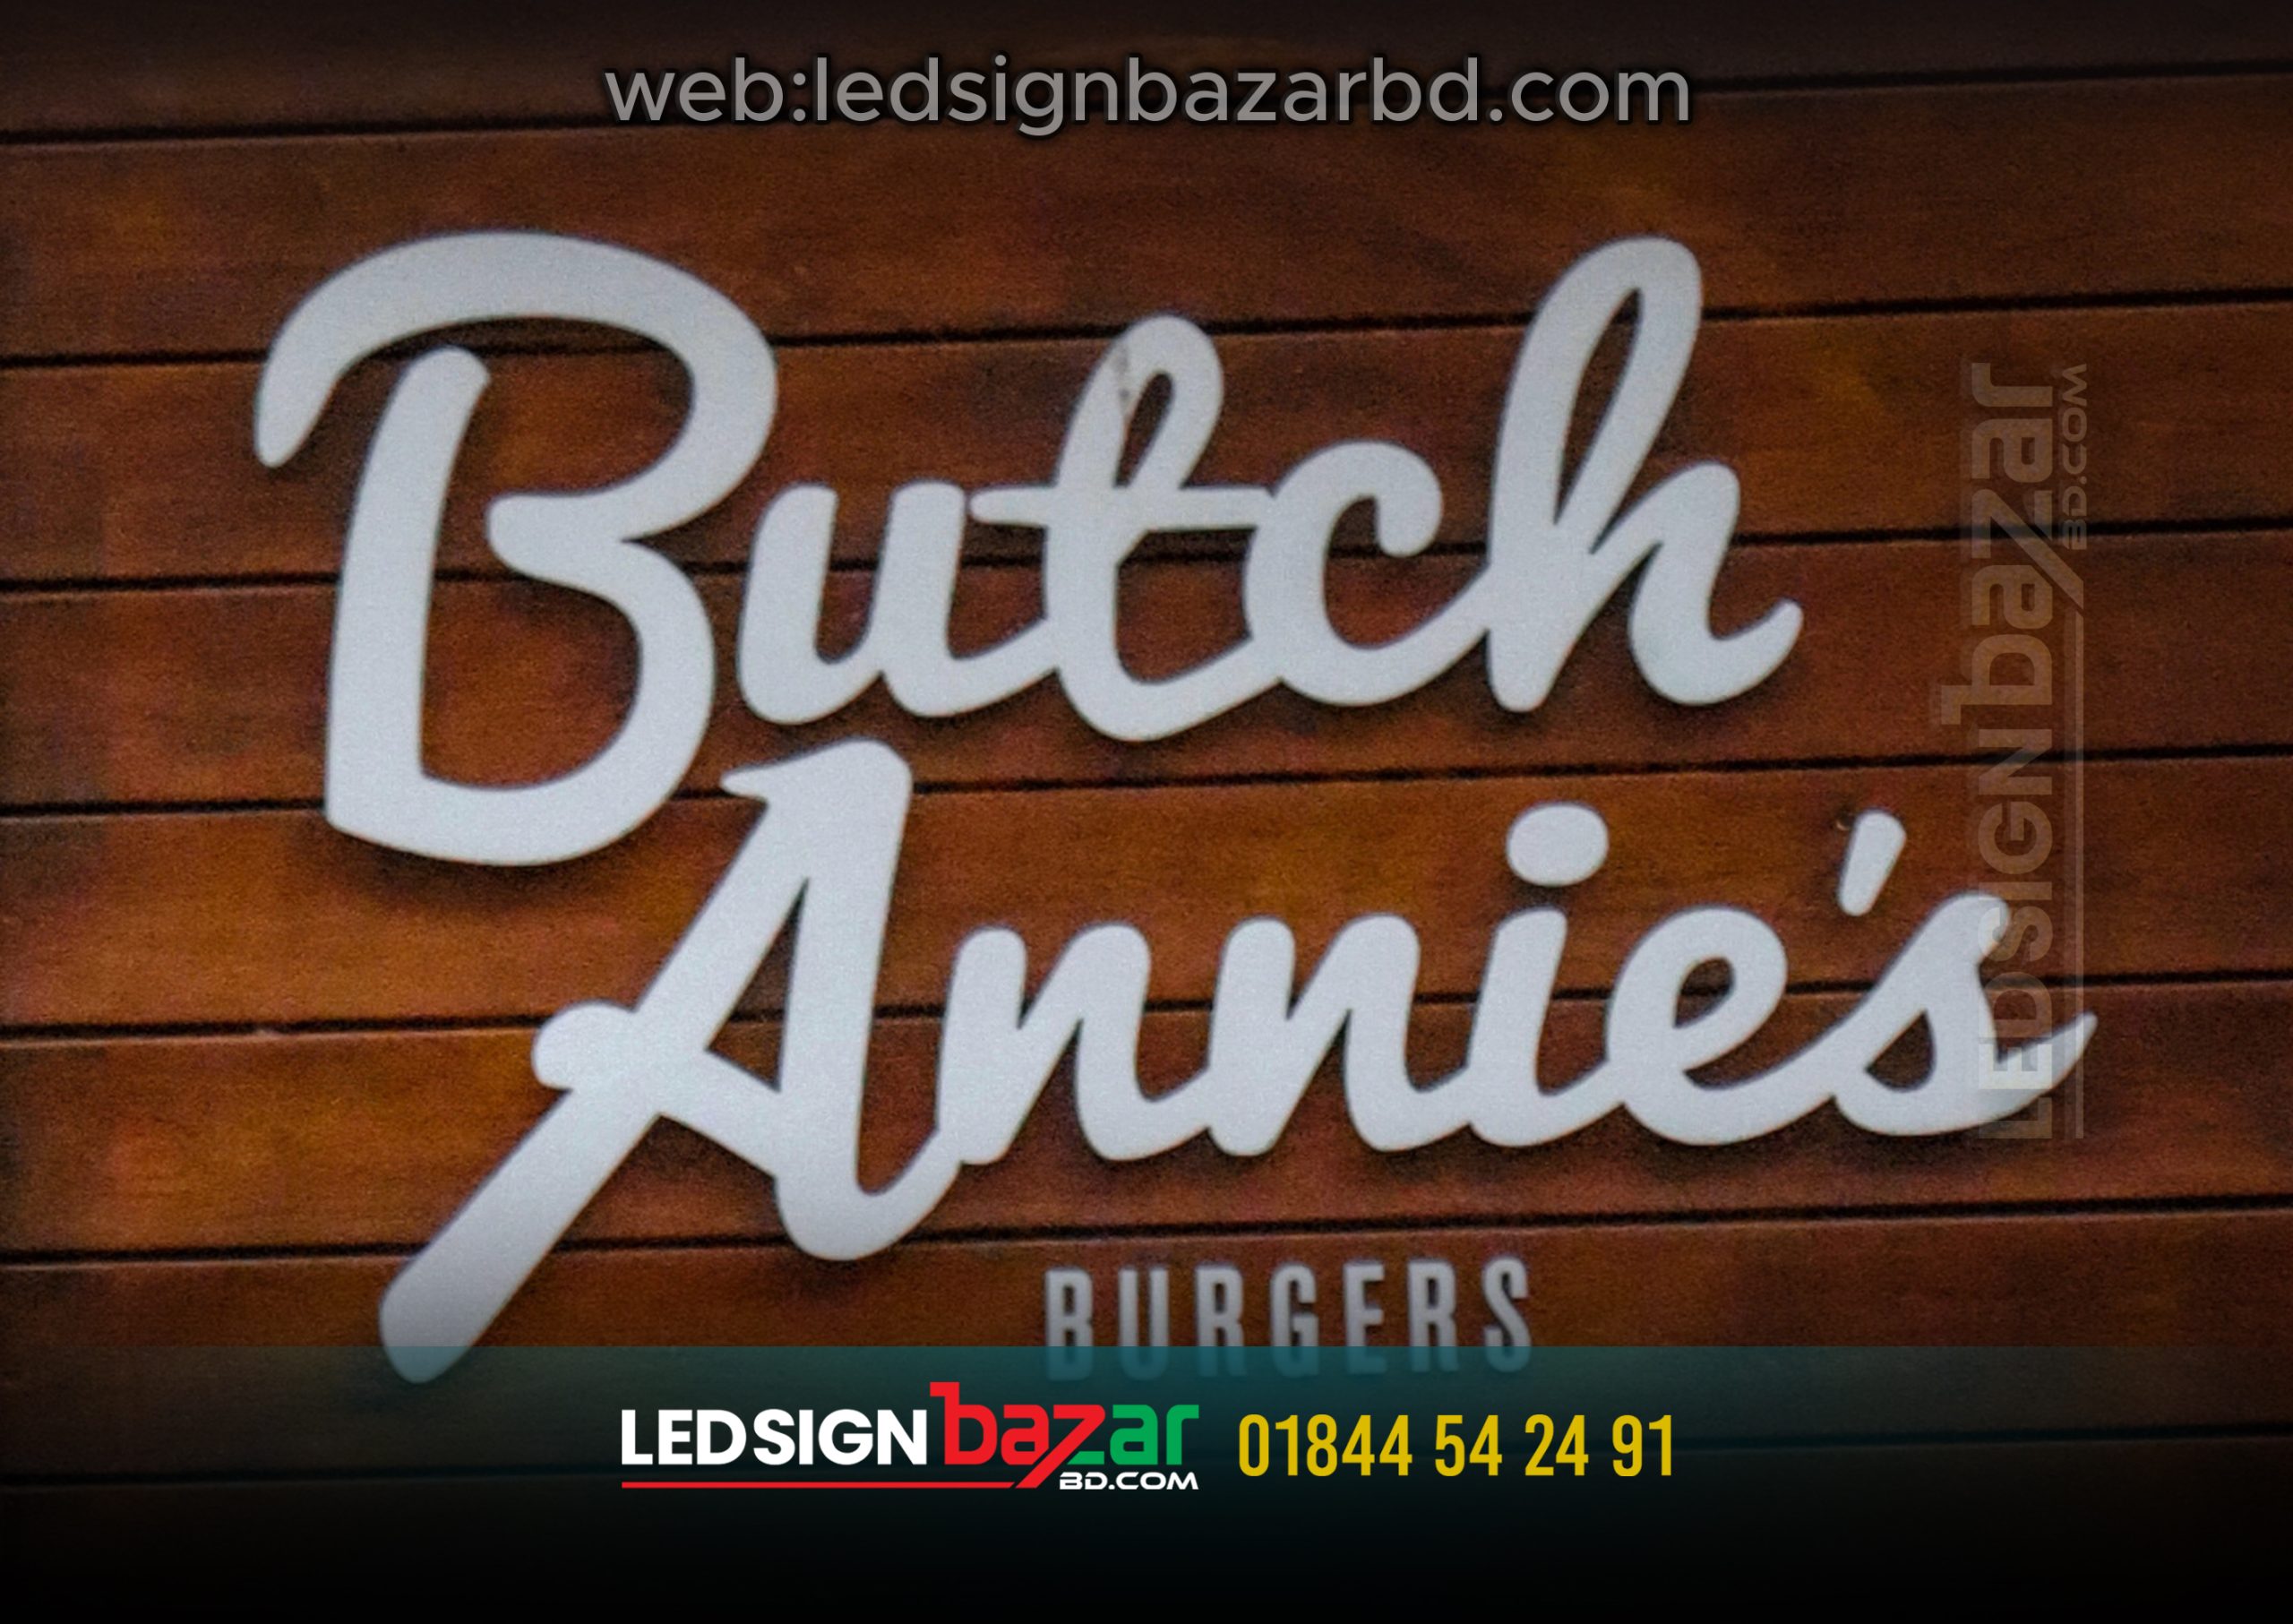 BUTCH ARRIES LETTER NAMEPLATE BD